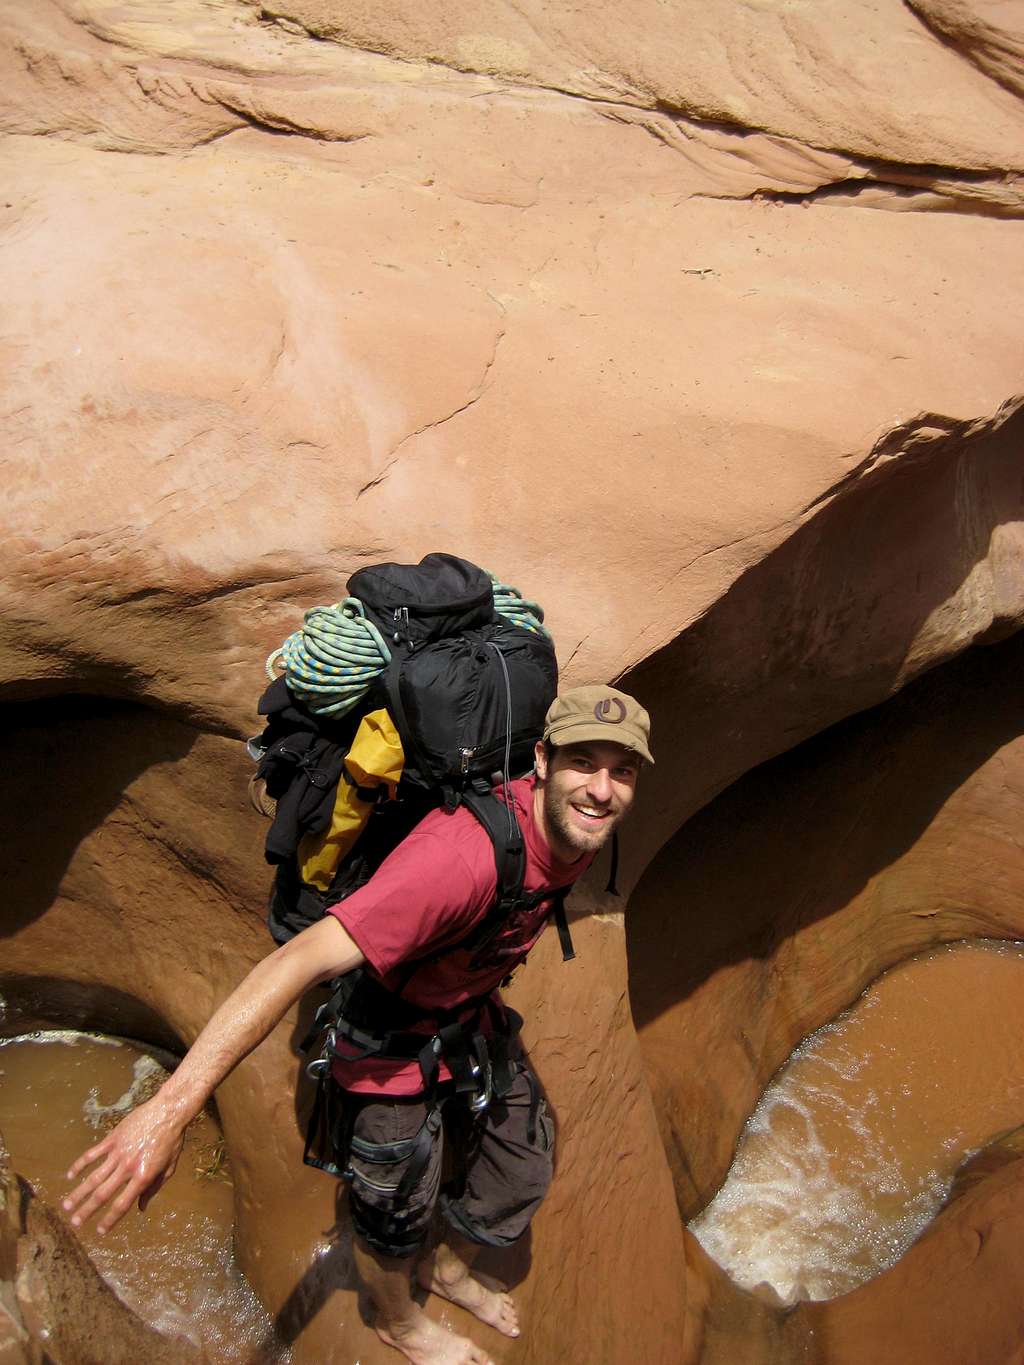 A small slot canyon in Coyote Gulch